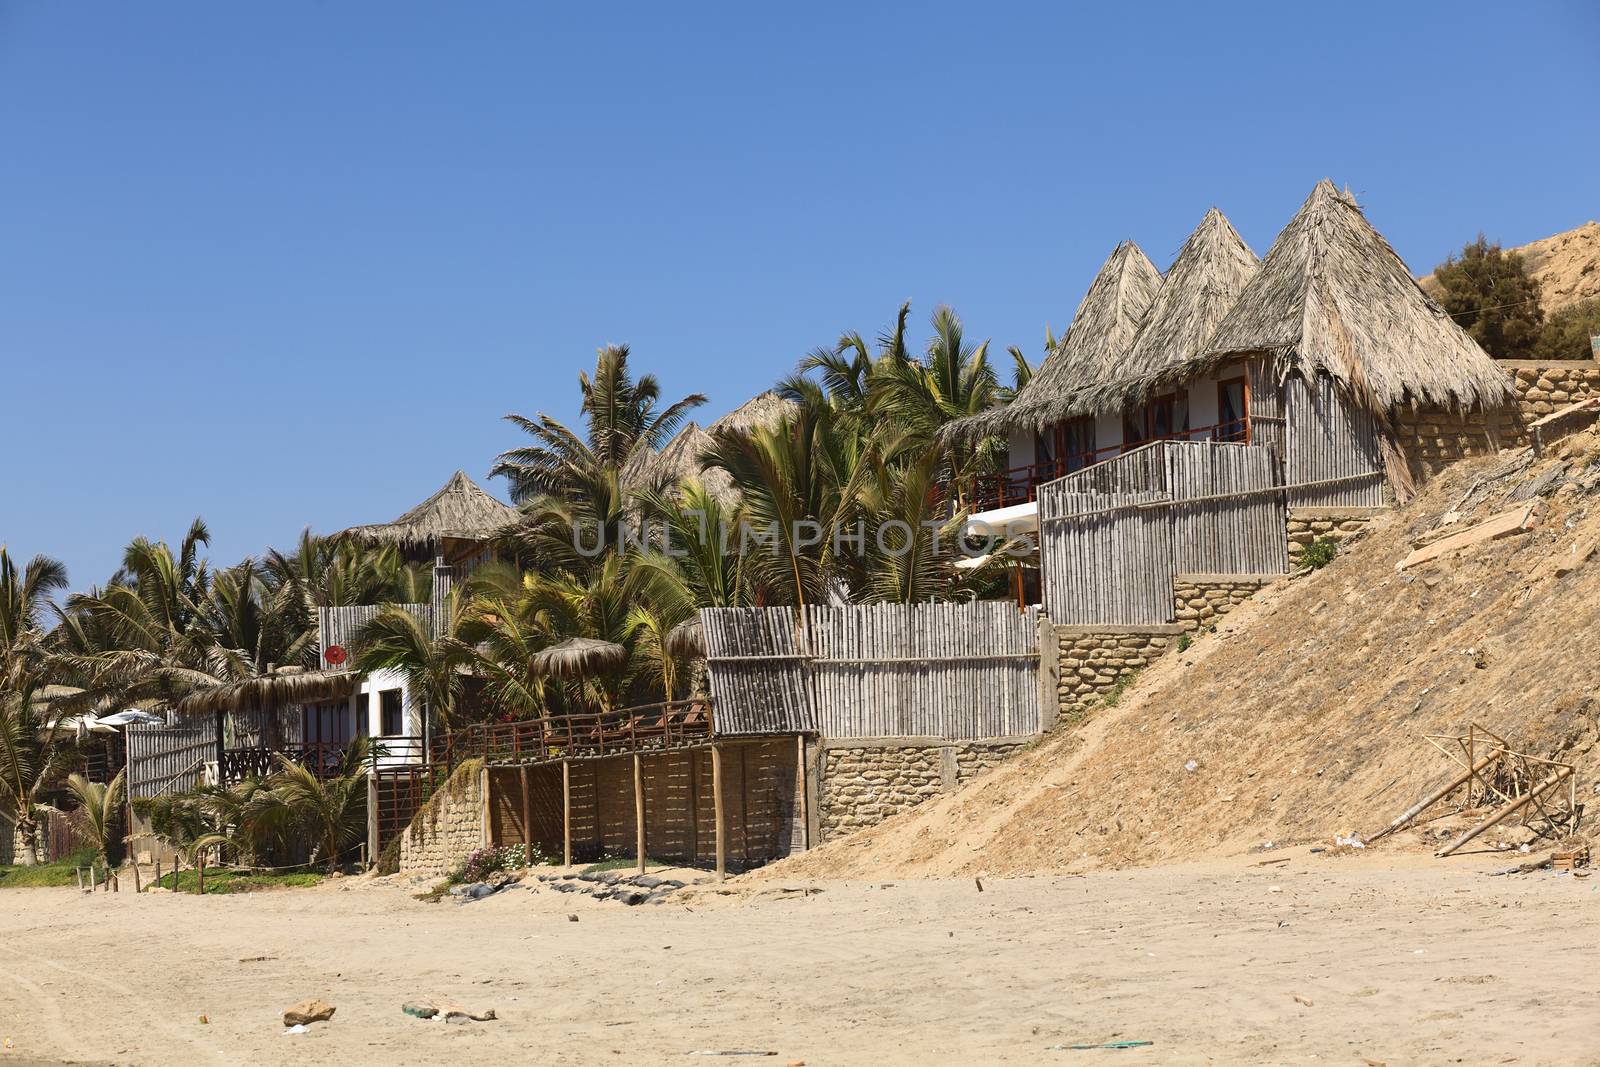 MANCORA, PERU - AUGUST 17, 2013: Thatched roof accomodation with palm trees along the sandy beach on August 17, 2013 in Mancora, Peru. Mancora is one of the most popular beach towns of Peru. 